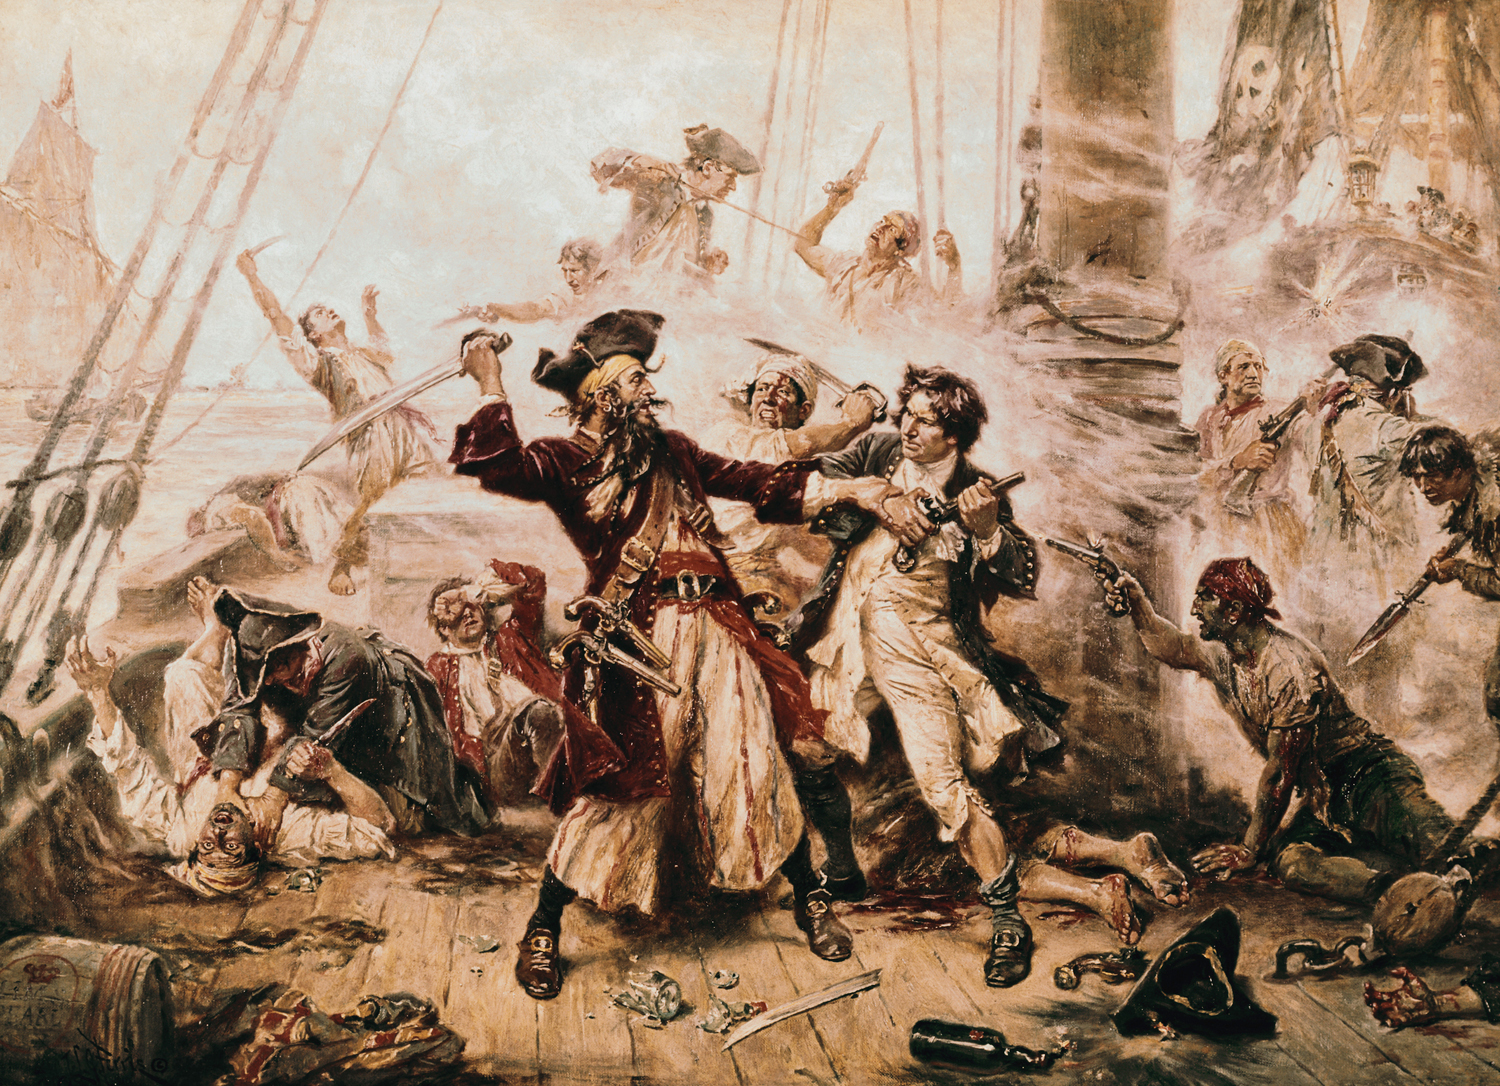 Original Picture: "The capture of the Pirate, Blackbeard", 1718. Painting by J. L. G. Ferris.